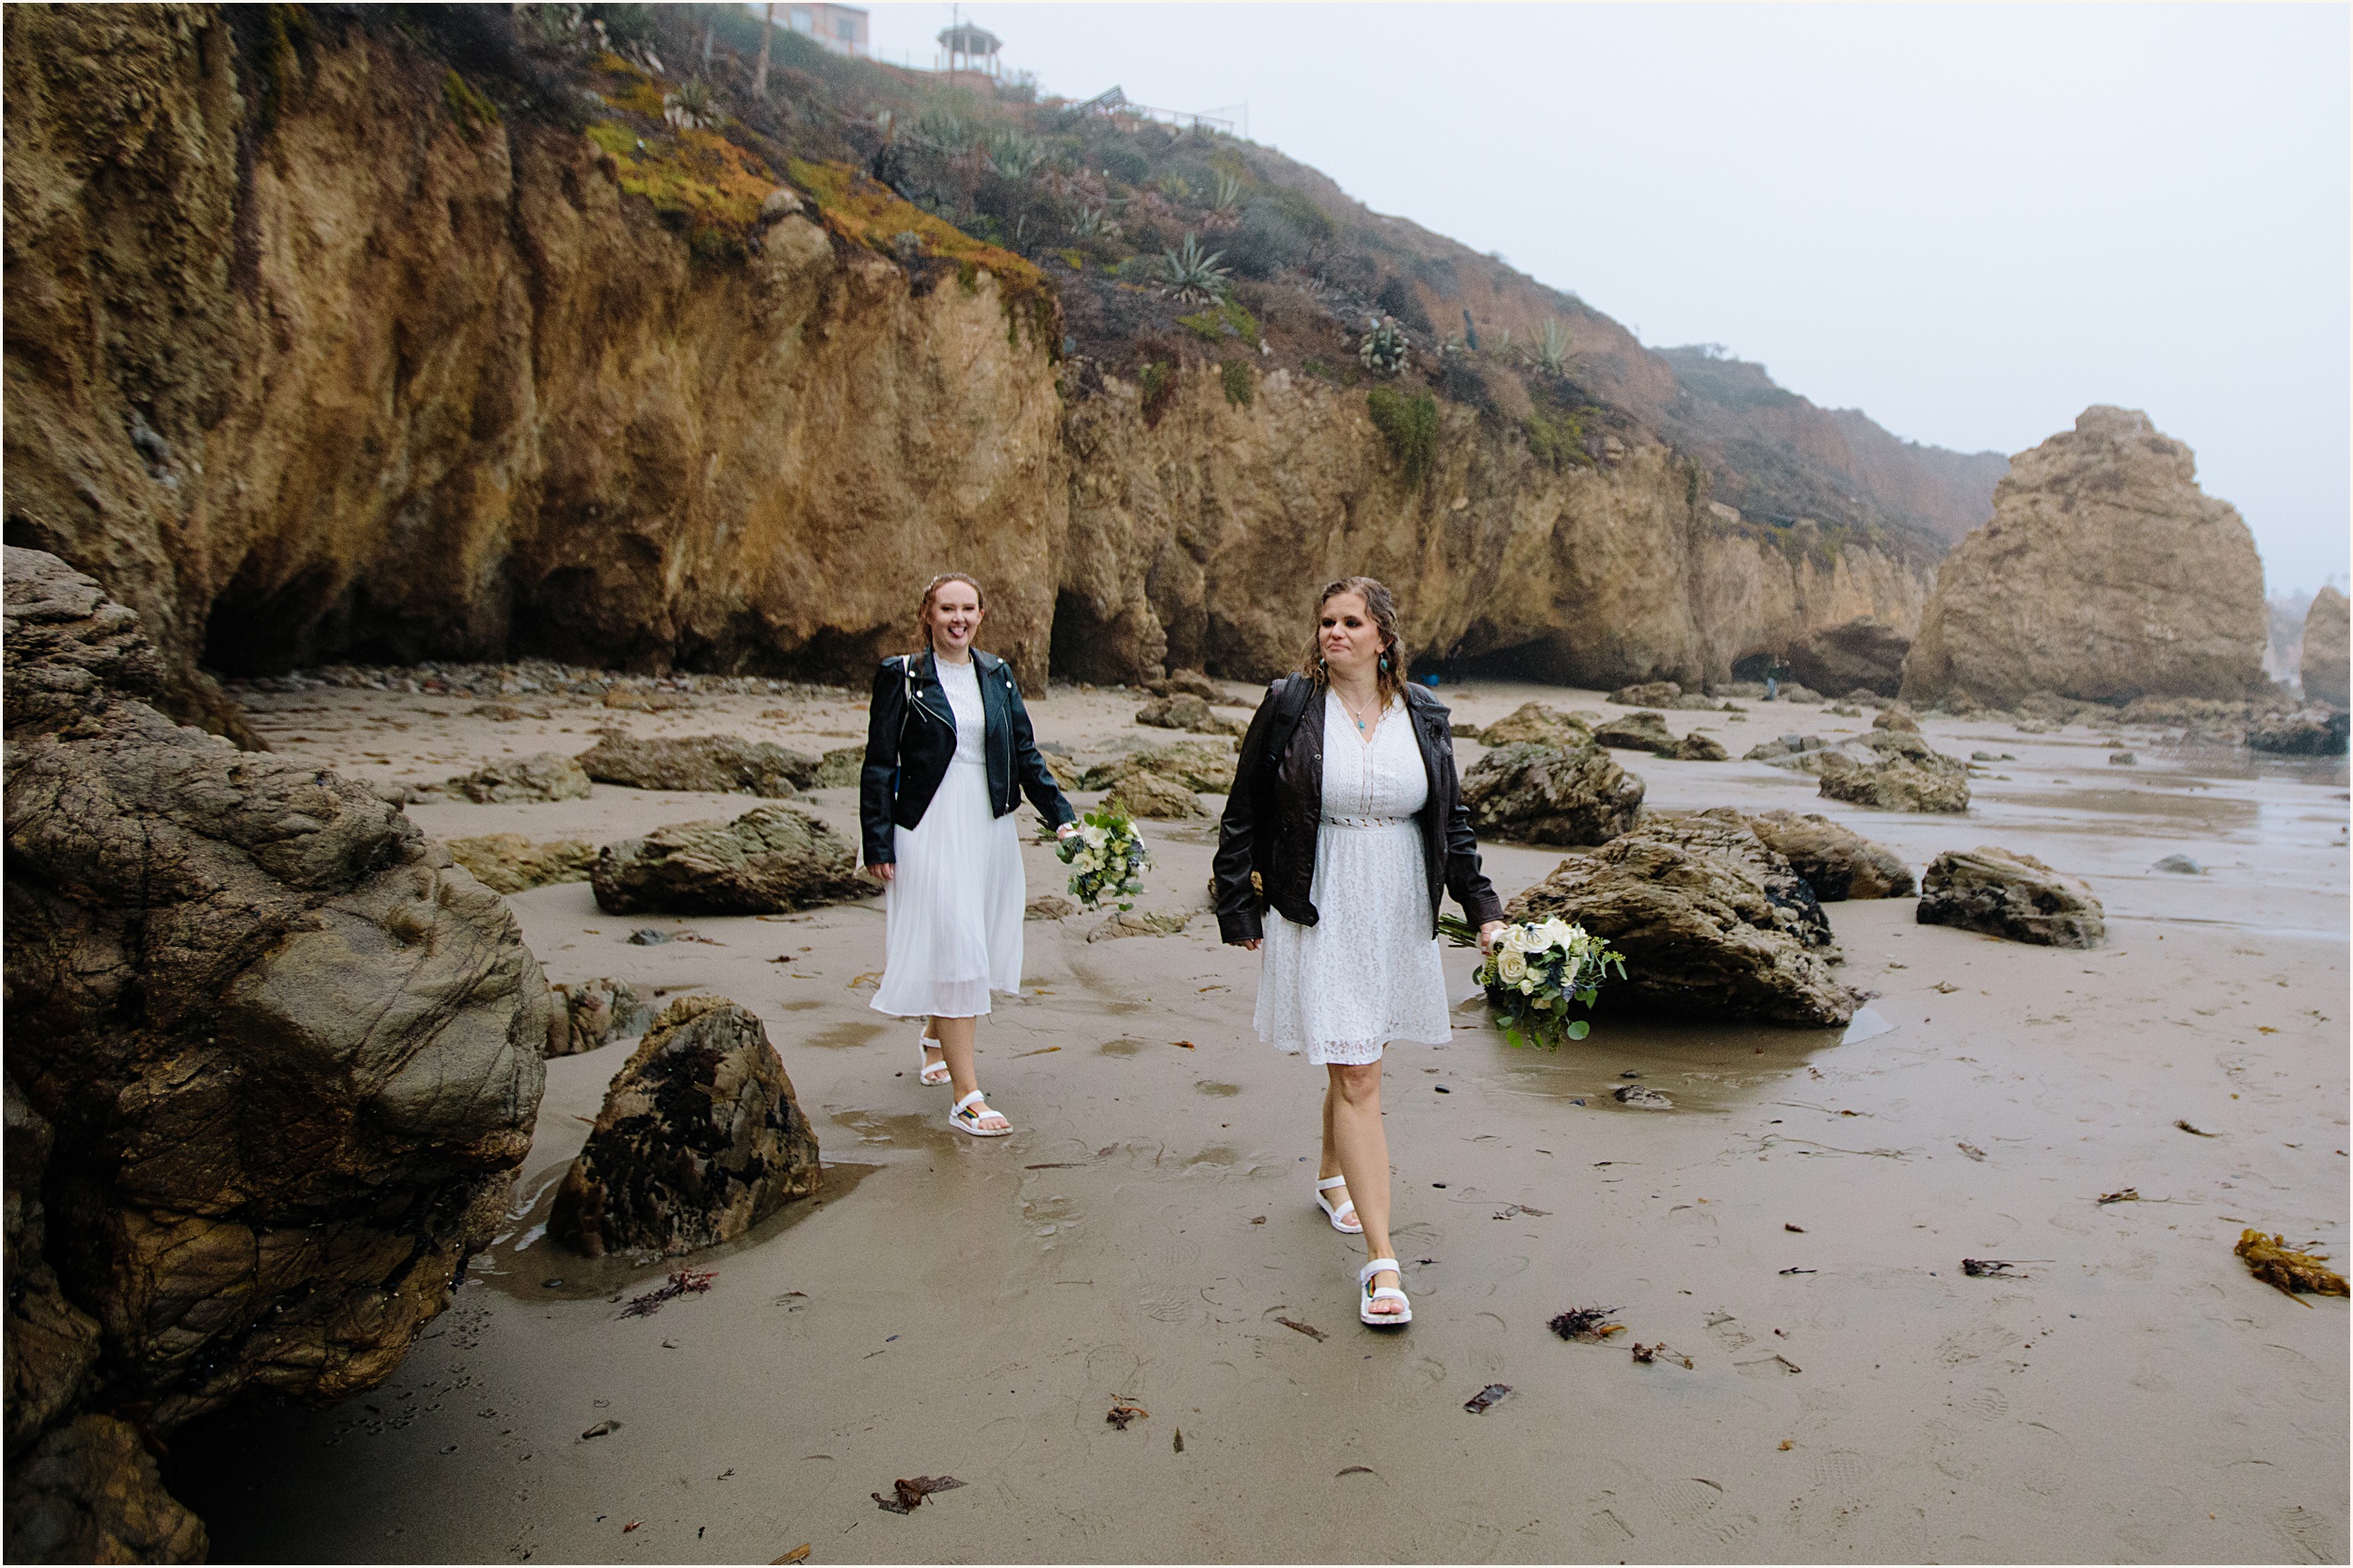 Photo of brides walking down El Matador beach in stunning white lace elopement dresses and leather jackets